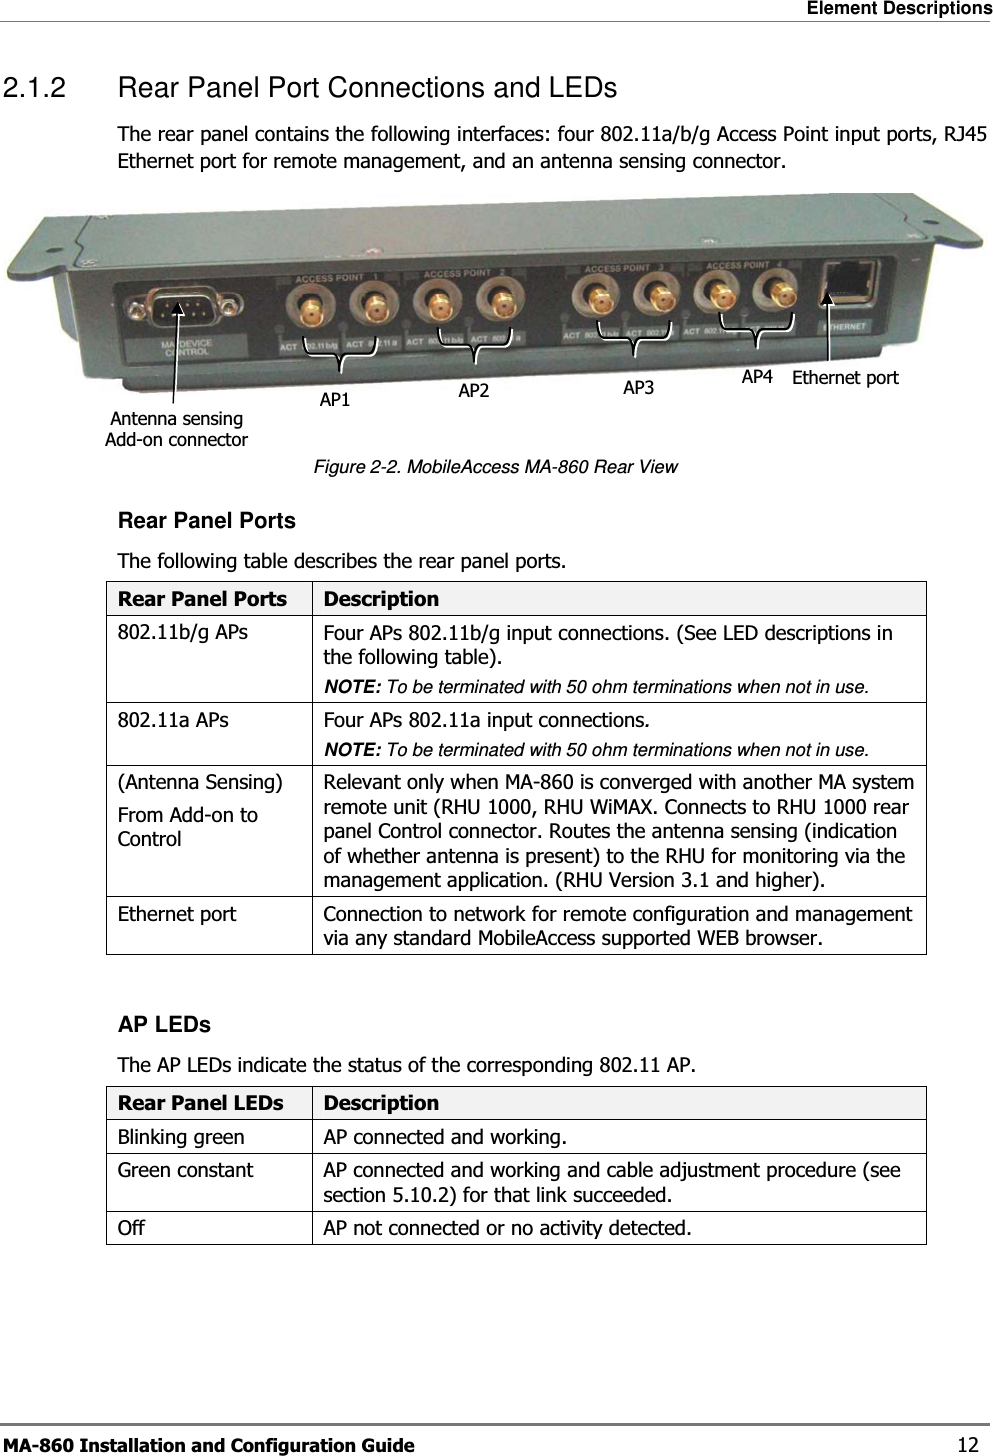 Element Descriptions MA-860 Installation and Configuration Guide    12 2.1.2  Rear Panel Port Connections and LEDs The rear panel contains the following interfaces: four 802.11a/b/g Access Point input ports, RJ45 Ethernet port for remote management, and an antenna sensing connector.   Figure  2-2. MobileAccess MA-860 Rear View Rear Panel Ports The following table describes the rear panel ports. Rear Panel Ports  Description 802.11b/g APs  Four APs 802.11b/g input connections. (See LED descriptions in the following table).NOTE: To be terminated with 50 ohm terminations when not in use.  802.11a APs  Four APs 802.11a input connections. NOTE: To be terminated with 50 ohm terminations when not in use. (Antenna Sensing) From Add-on to Control Relevant only when MA-860 is converged with another MA system remote unit (RHU 1000, RHU WiMAX. Connects to RHU 1000 rear panel Control connector. Routes the antenna sensing (indication of whether antenna is present) to the RHU for monitoring via the management application. (RHU Version 3.1 and higher). Ethernet port  Connection to network for remote configuration and management via any standard MobileAccess supported WEB browser.  AP LEDs The AP LEDs indicate the status of the corresponding 802.11 AP.  Rear Panel LEDs  Description Blinking green  AP connected and working. Green constant  AP connected and working and cable adjustment procedure (see section  5.10.2) for that link succeeded. Off  AP not connected or no activity detected.  Ethernet port Antenna sensing Add-on connectorAP1AP2AP3AP4